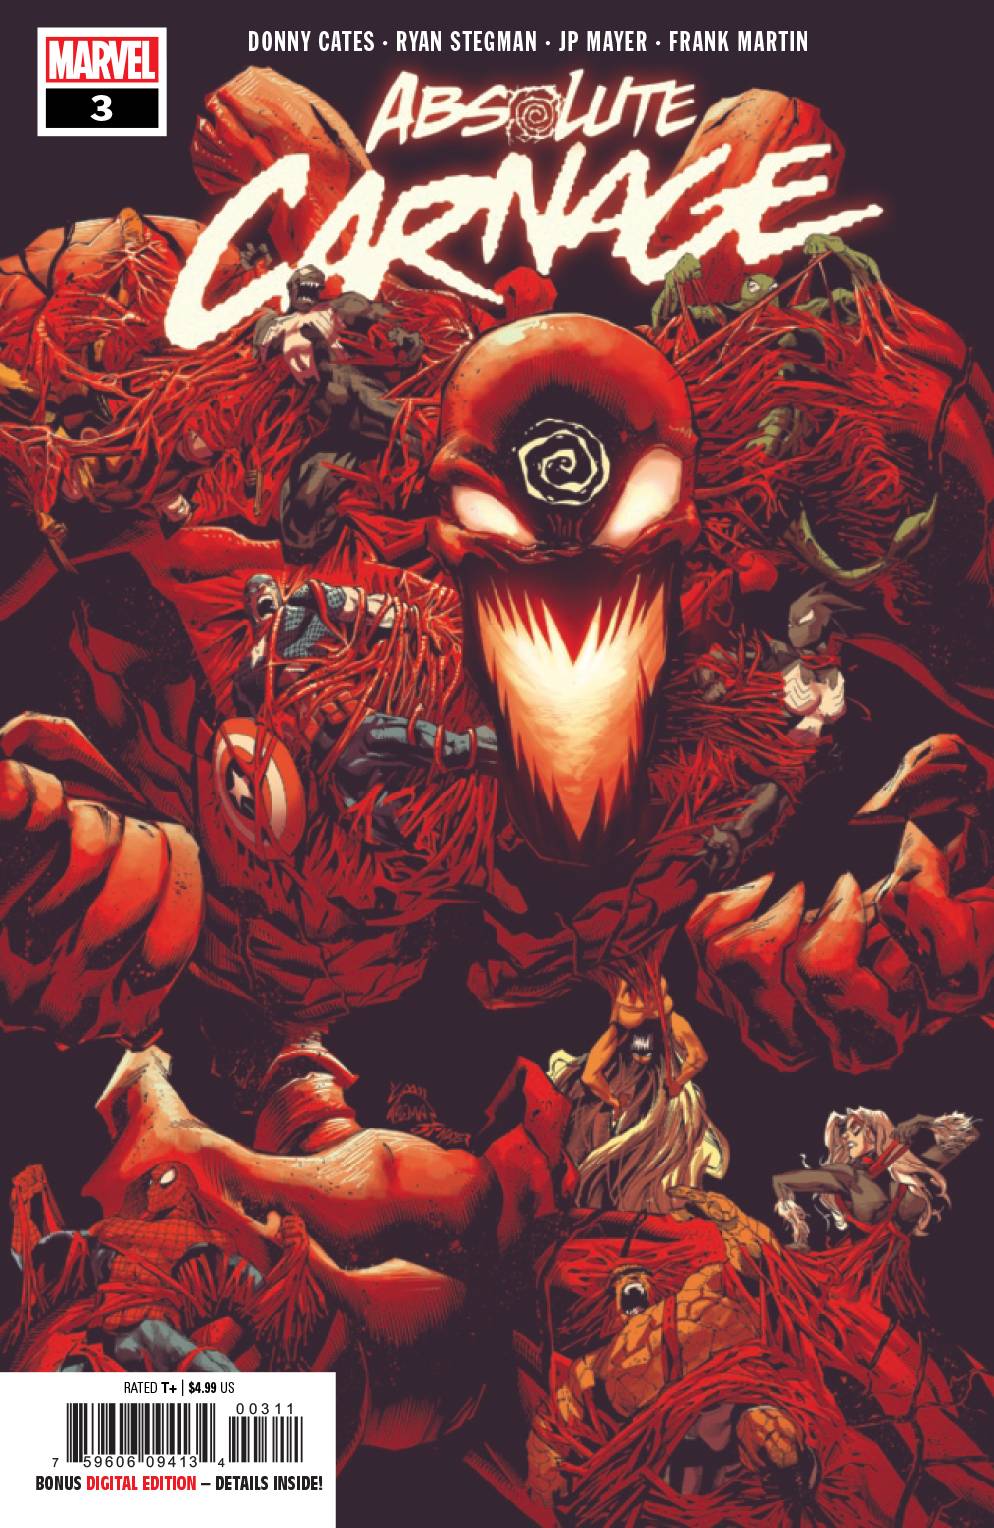 ABSOLUTE CARNAGE #3 (OF 5) AC